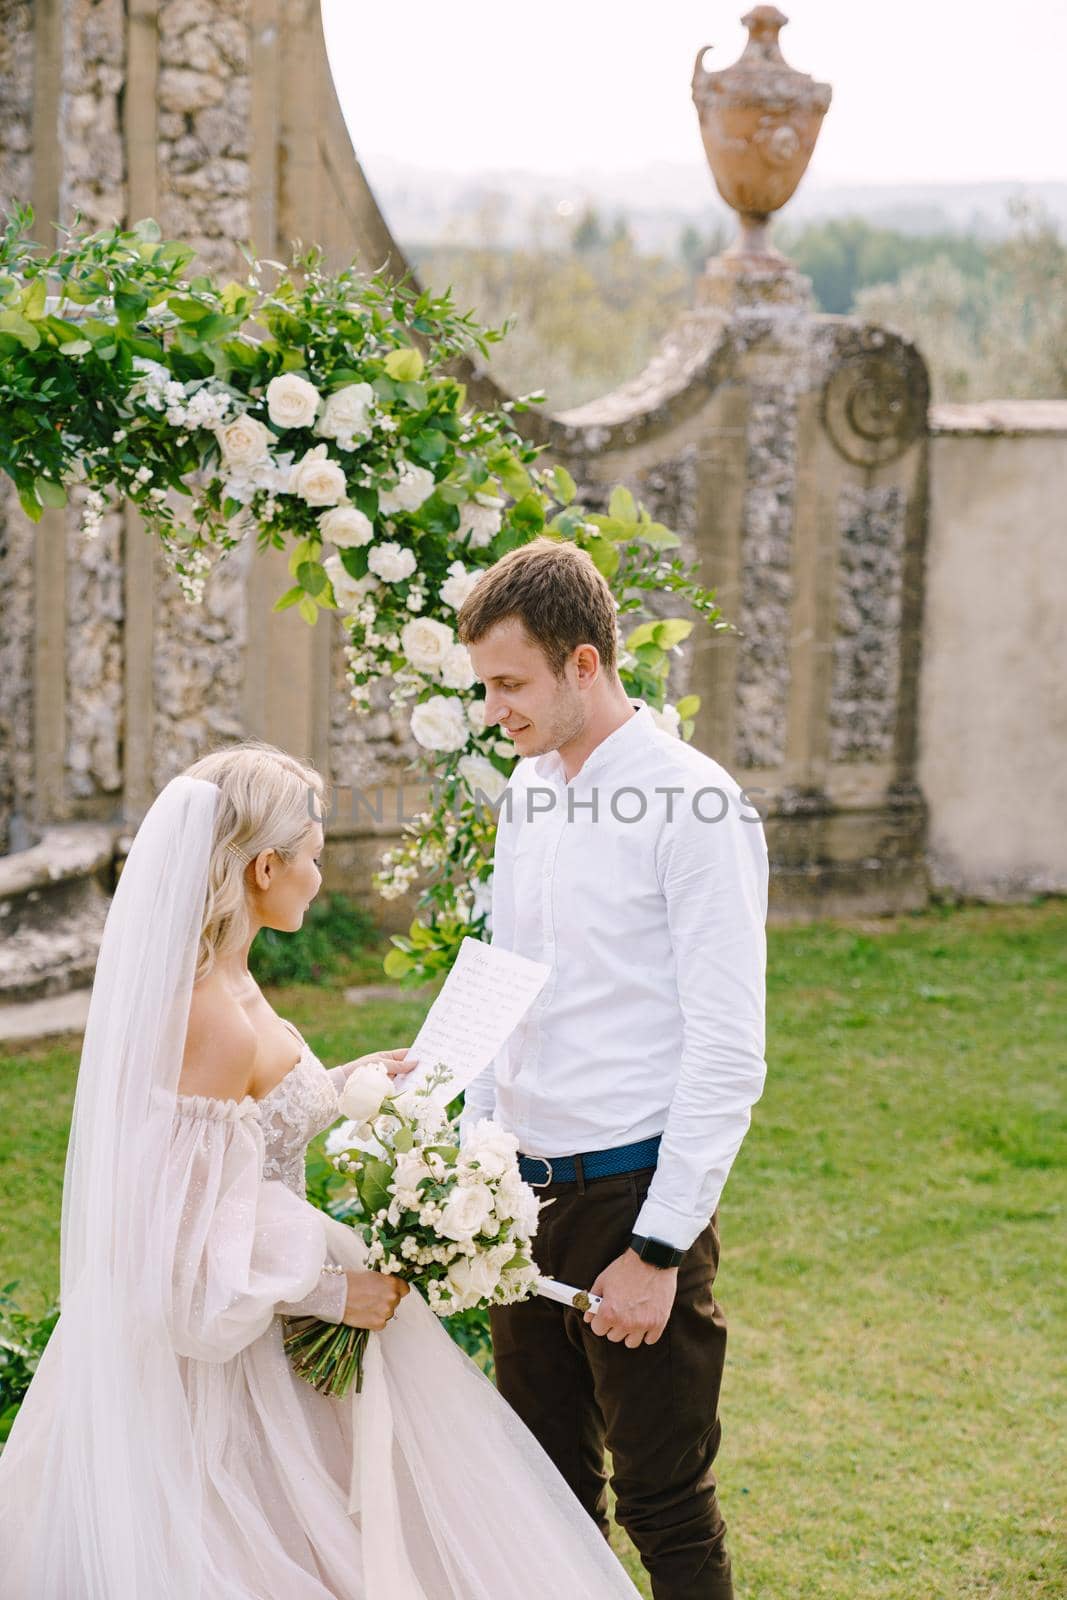 Florence, Italy - 02 october 2019: Wedding at an old winery villa in Tuscany, Italy. The bride reads the wedding oath. Round wedding arch decorated with white flowers and greenery by Nadtochiy